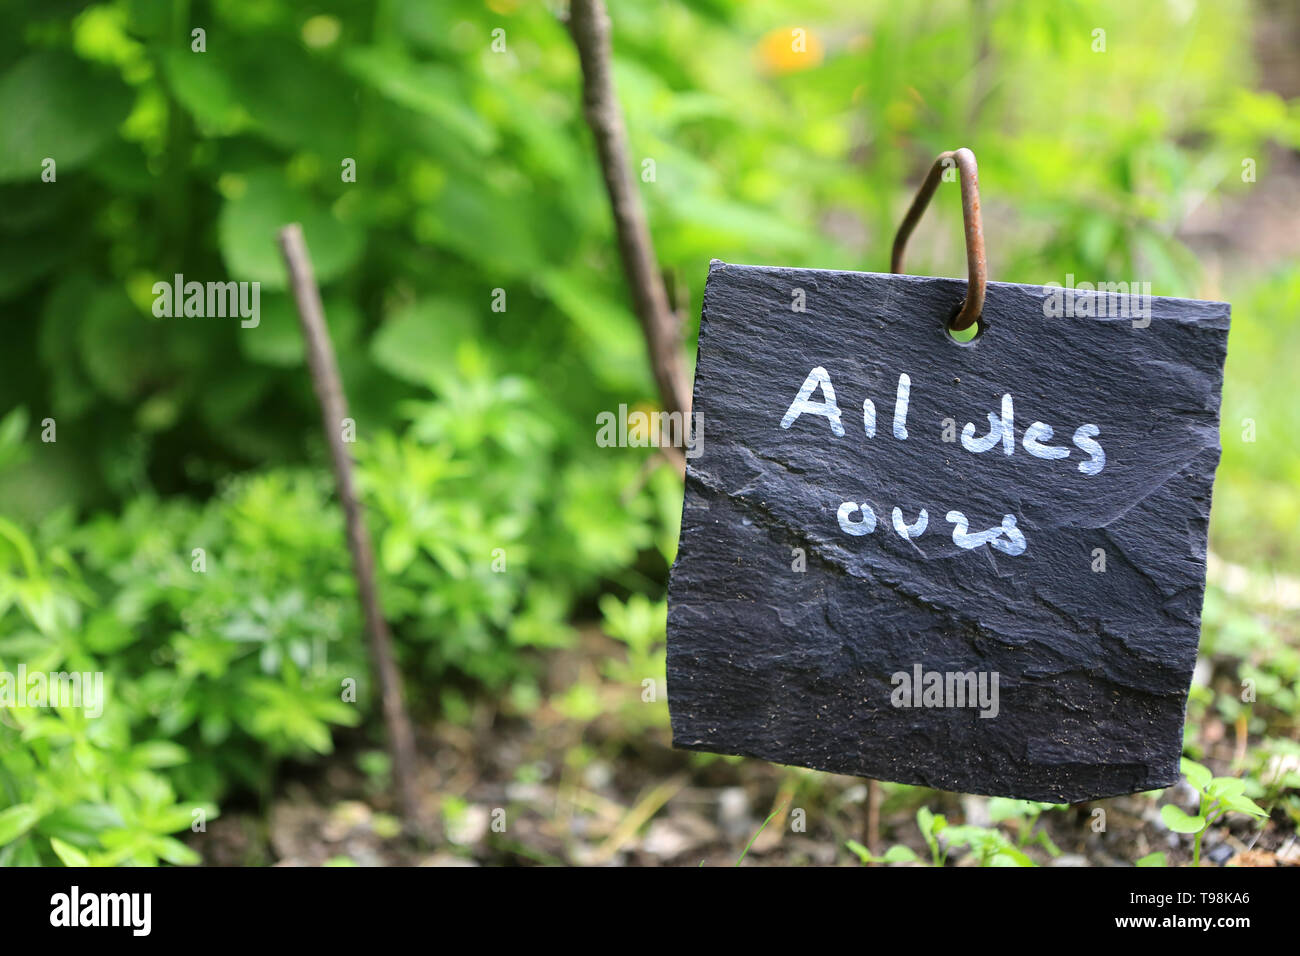 Ail des Ours. Stock Photo